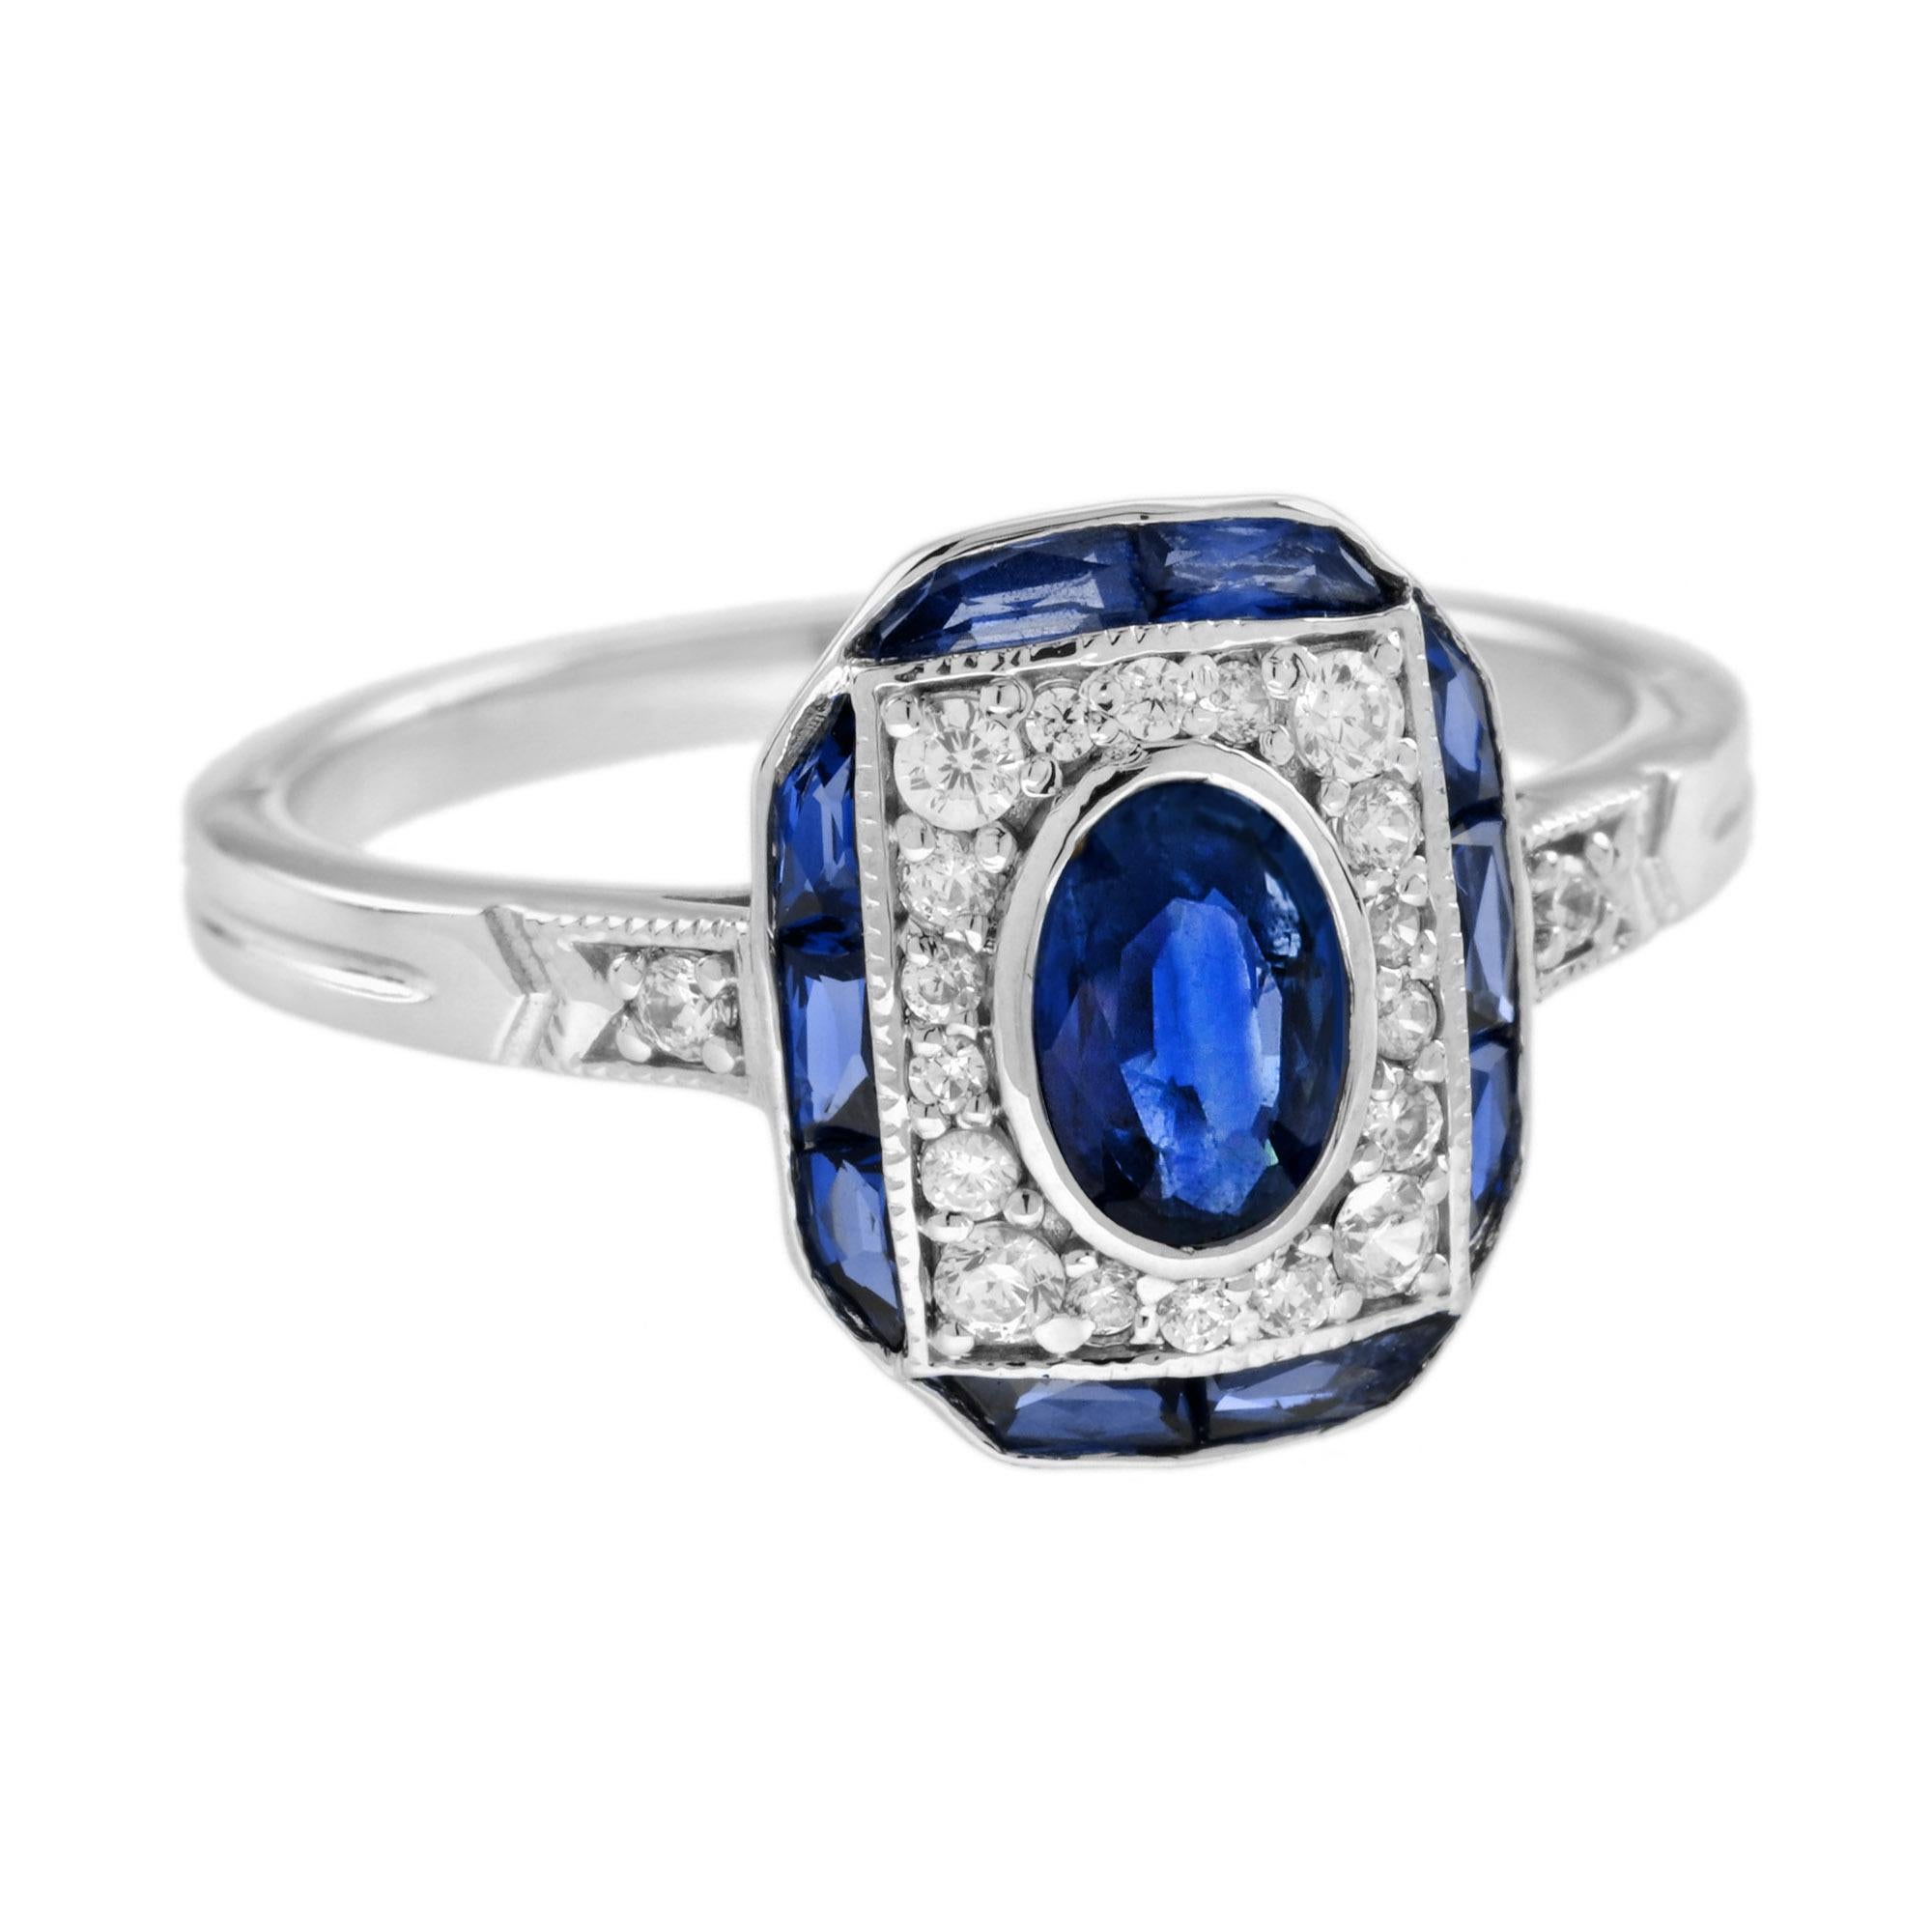 For Sale:  Oval Blue Sapphire and Diamond Art Deco Style Engagement Ring in 18K White Gold 3